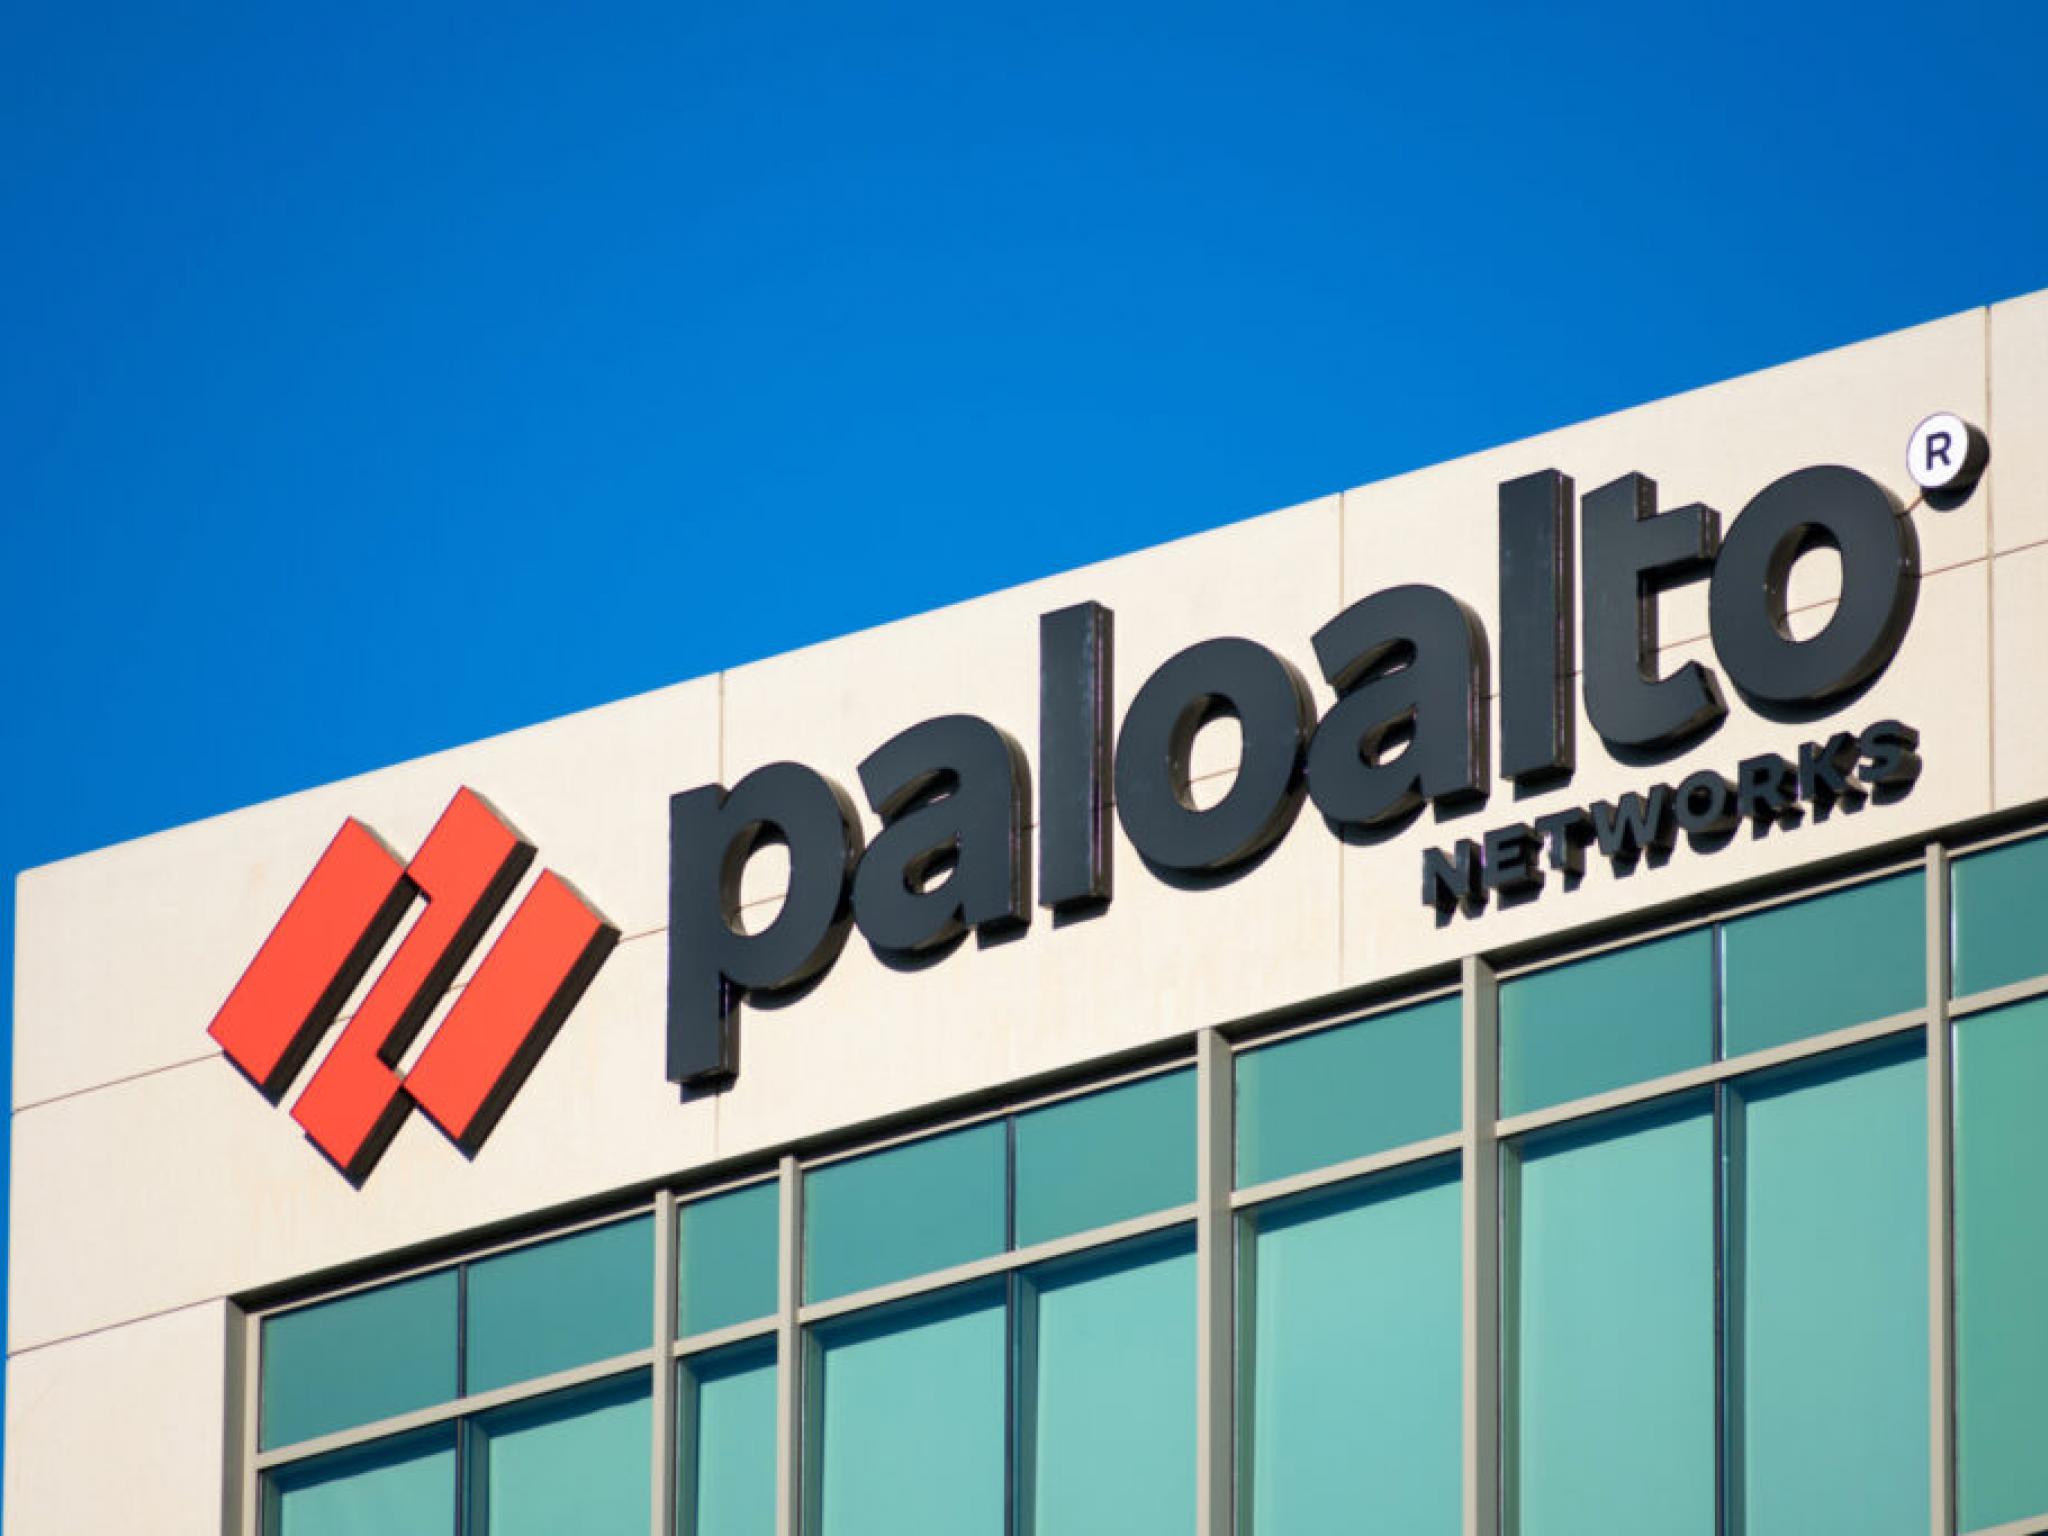  palo-alto-networks-stock-is-getting-a-lift-from-ibm-thursday-whats-going-on 